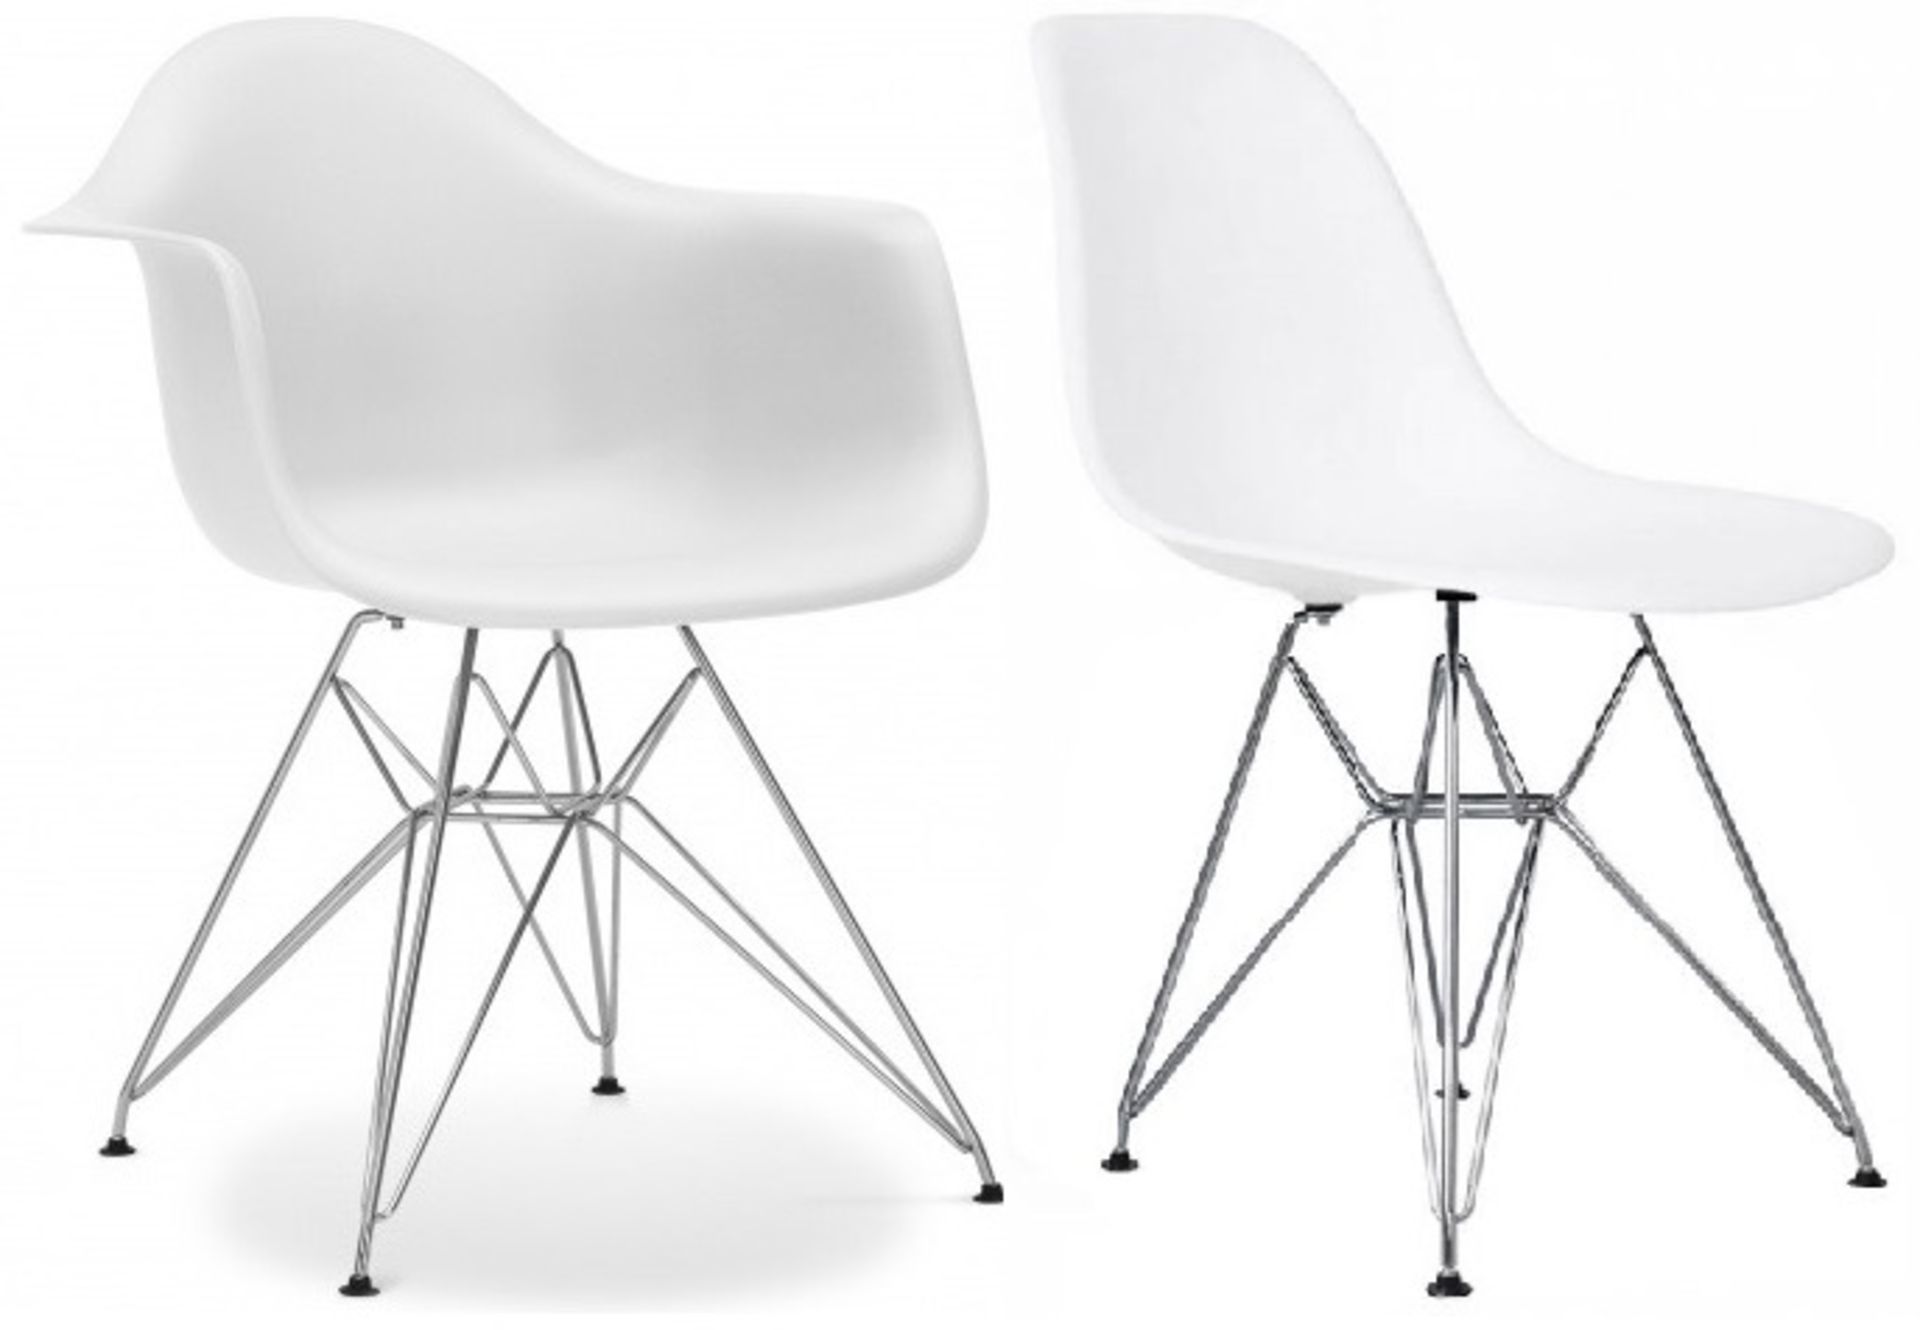 A Set Of 6 x Eames-Style Dining Chairs in White - Includes 2 x Carvers - Classic Design With Deep